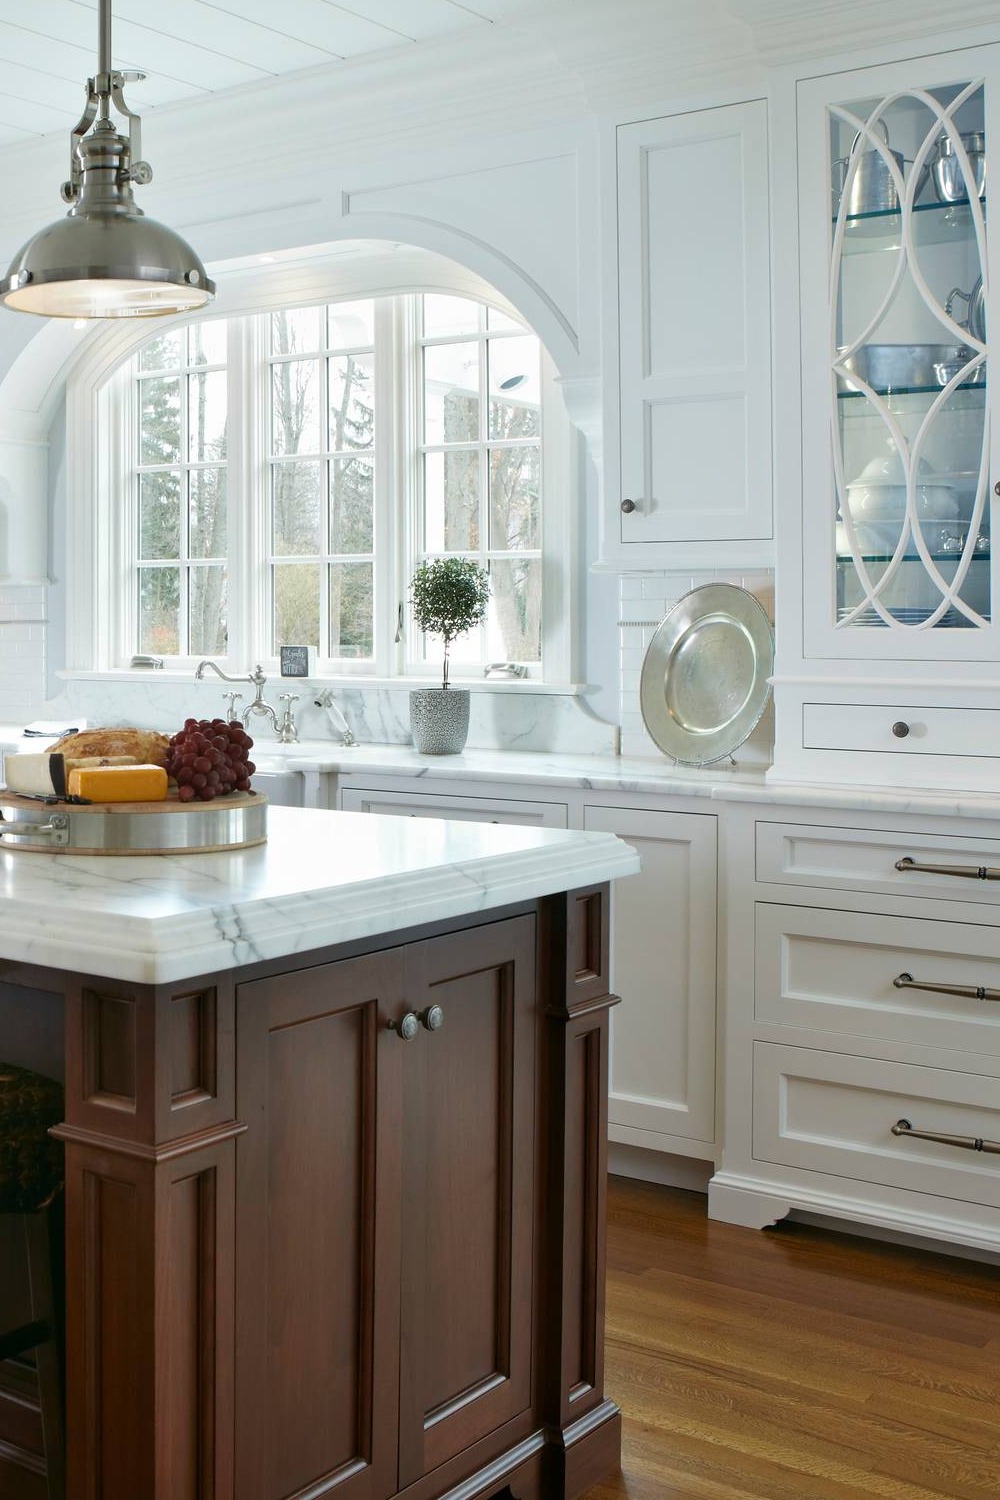 Mullions Glass Cabinet Options Marble Countertops Farmhouse Sink